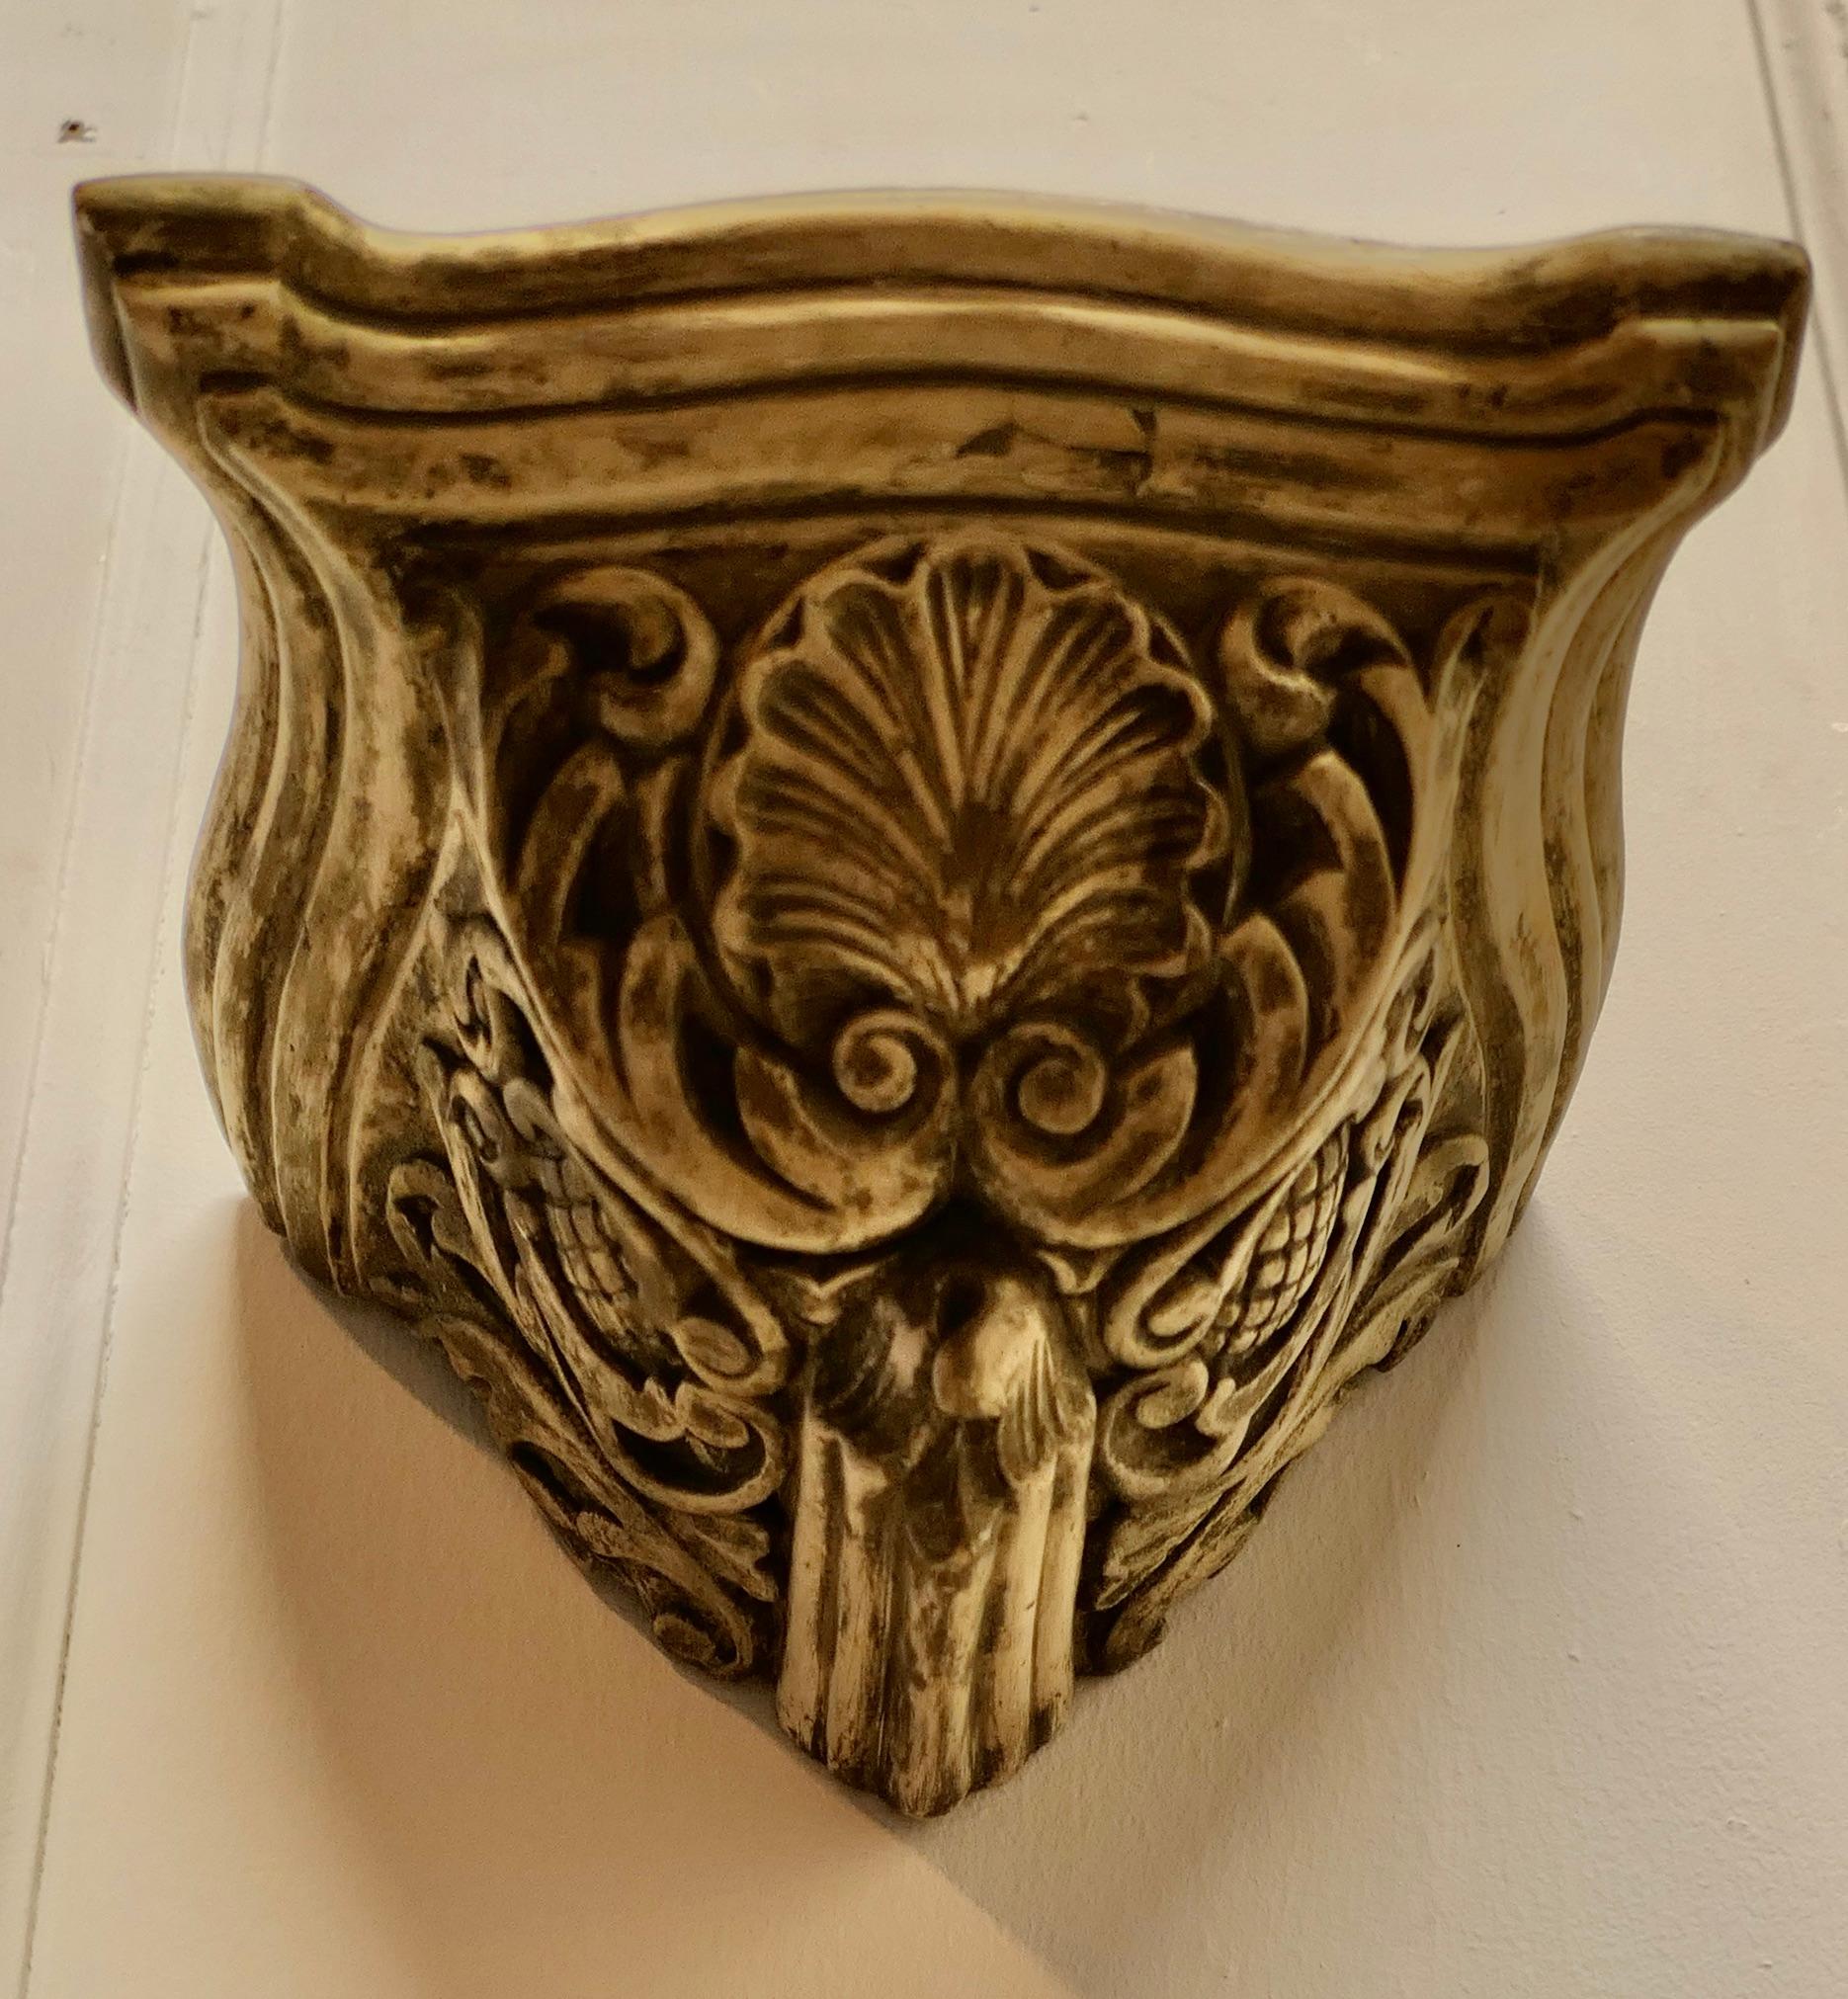 Weathered Wall Bracket, carved with Shell Decoration

This is a well weathered piece, the bracket is made in hard plaster with a very worn gilt finish
It is in generally good condition with a weathered finish 
The bracket is 6” high, 10” x 9 ” on